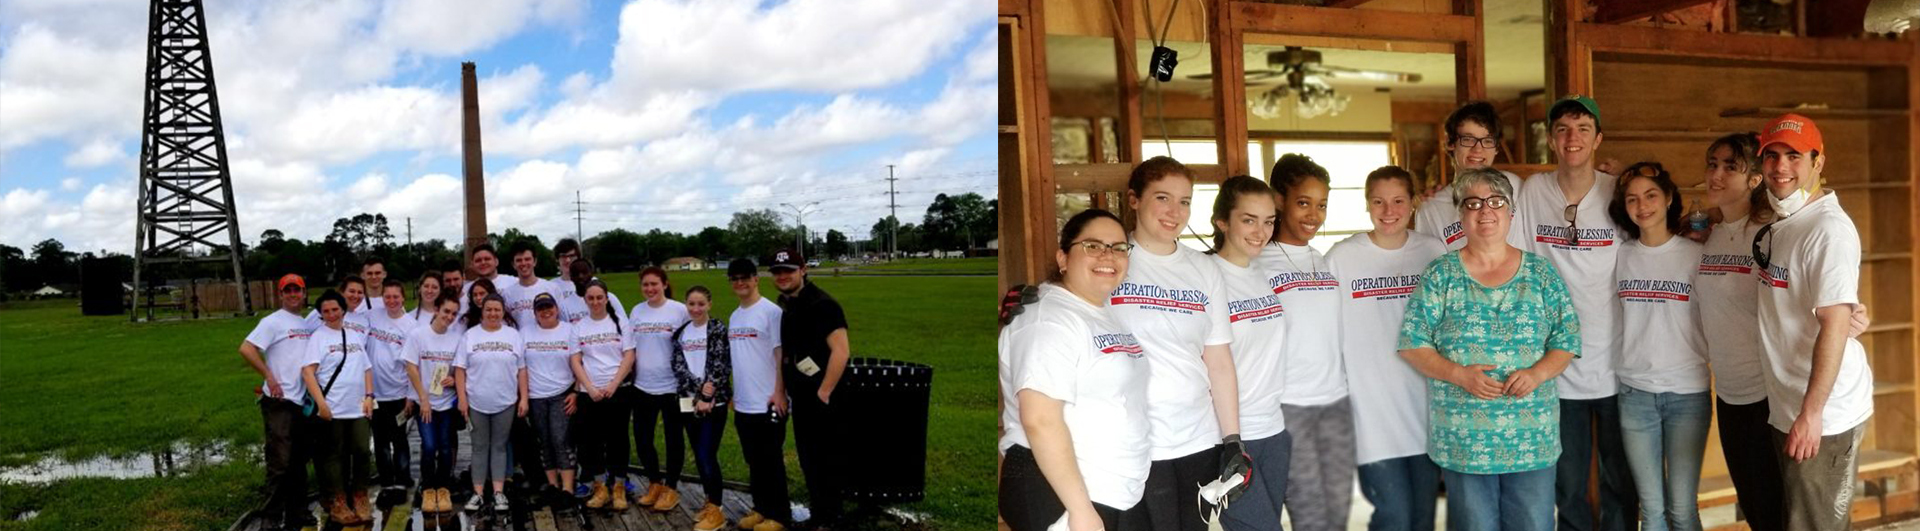 St. Joseph's students went to Houston to help with Hurricane Harvey cleanup during spring break 2018.